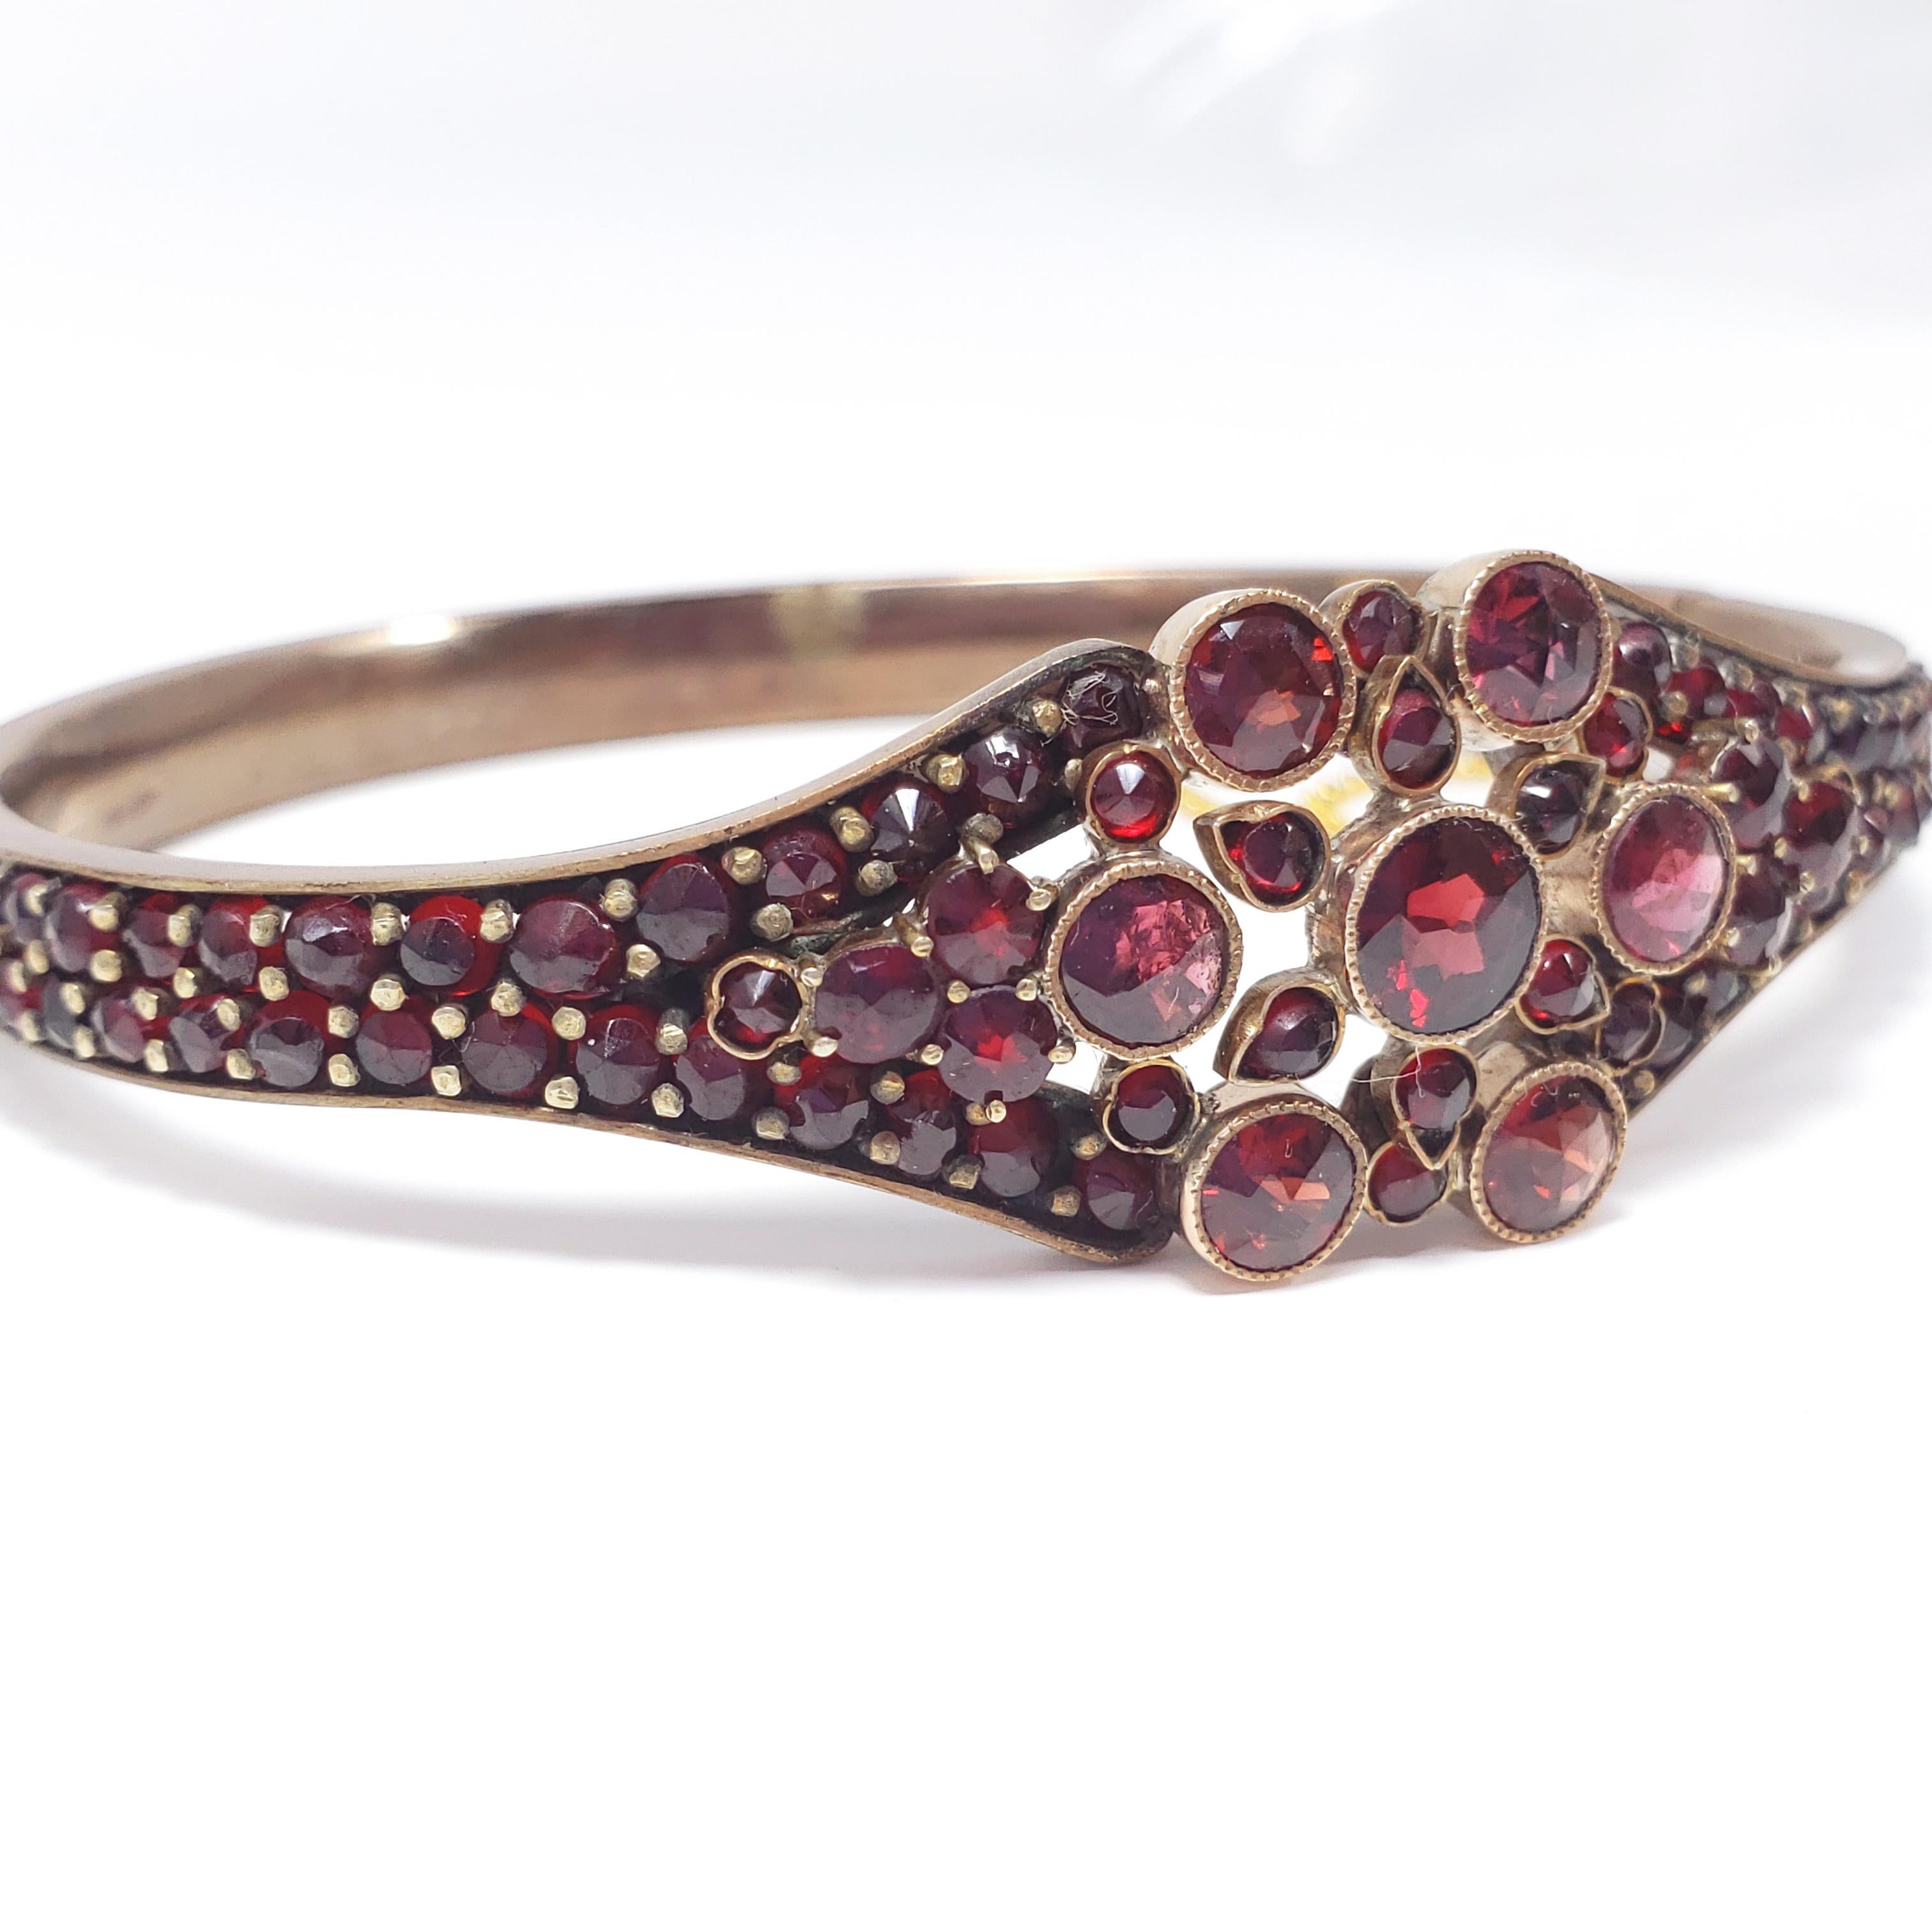 An antique bracelet decorated with pave garnets. The garnets on the face are open back and set in sterling silver, aligned in a decorative pattern, while the gemstones around the band are prong set. Fastened with a box-style clasp and safety